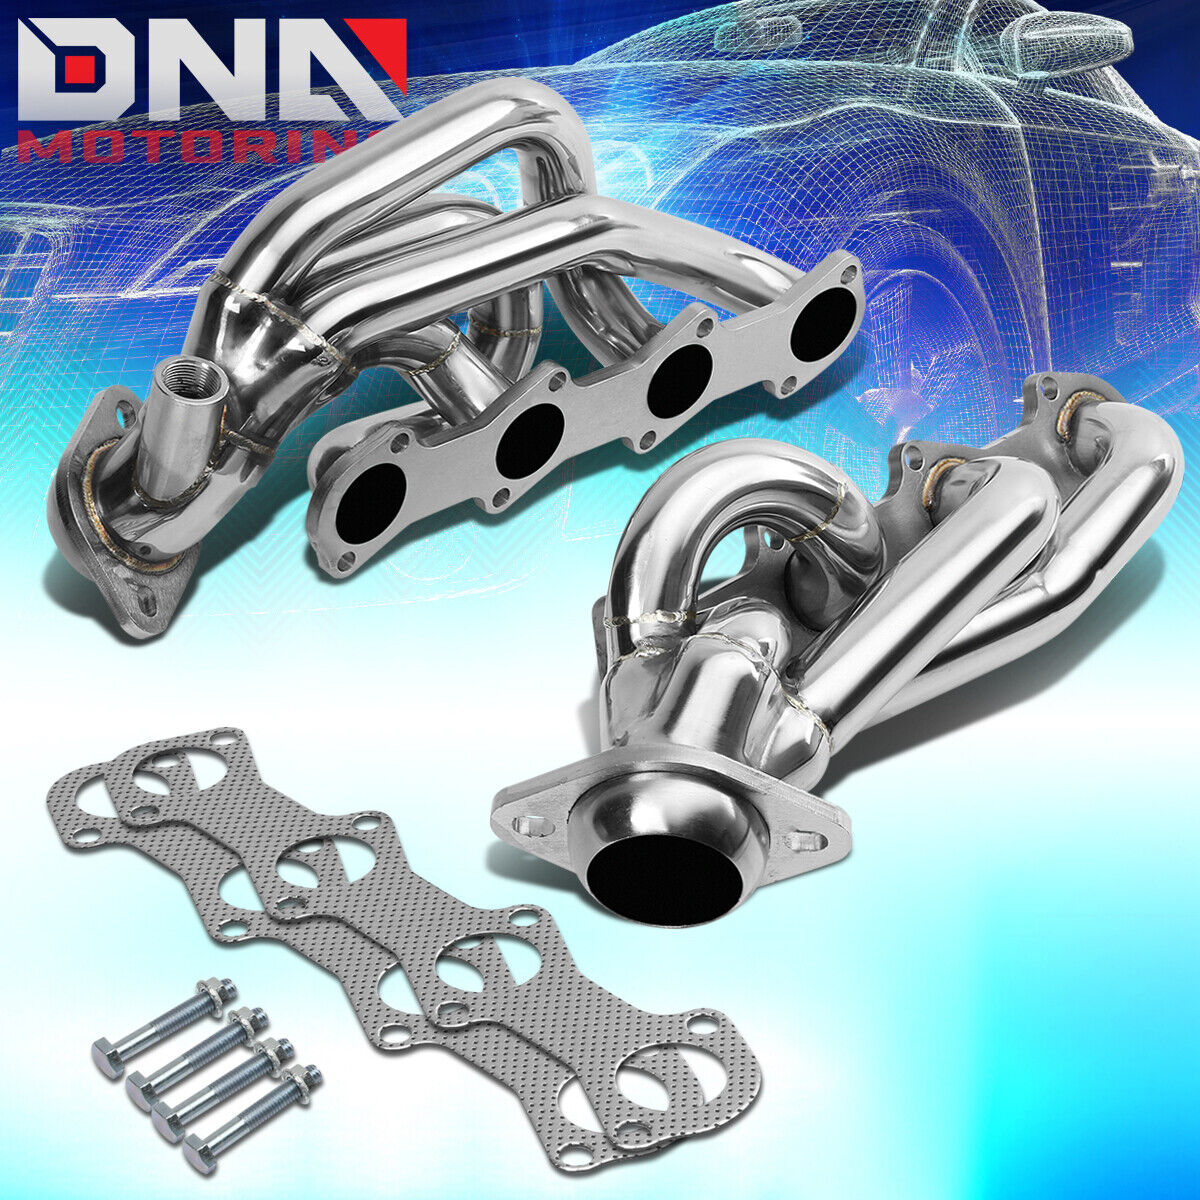 STAINLESS STEEL HEADER FOR 97-03 F150/F250/EXPEDITION 5.4L 8CYL EXHAUST/MANIFOLD